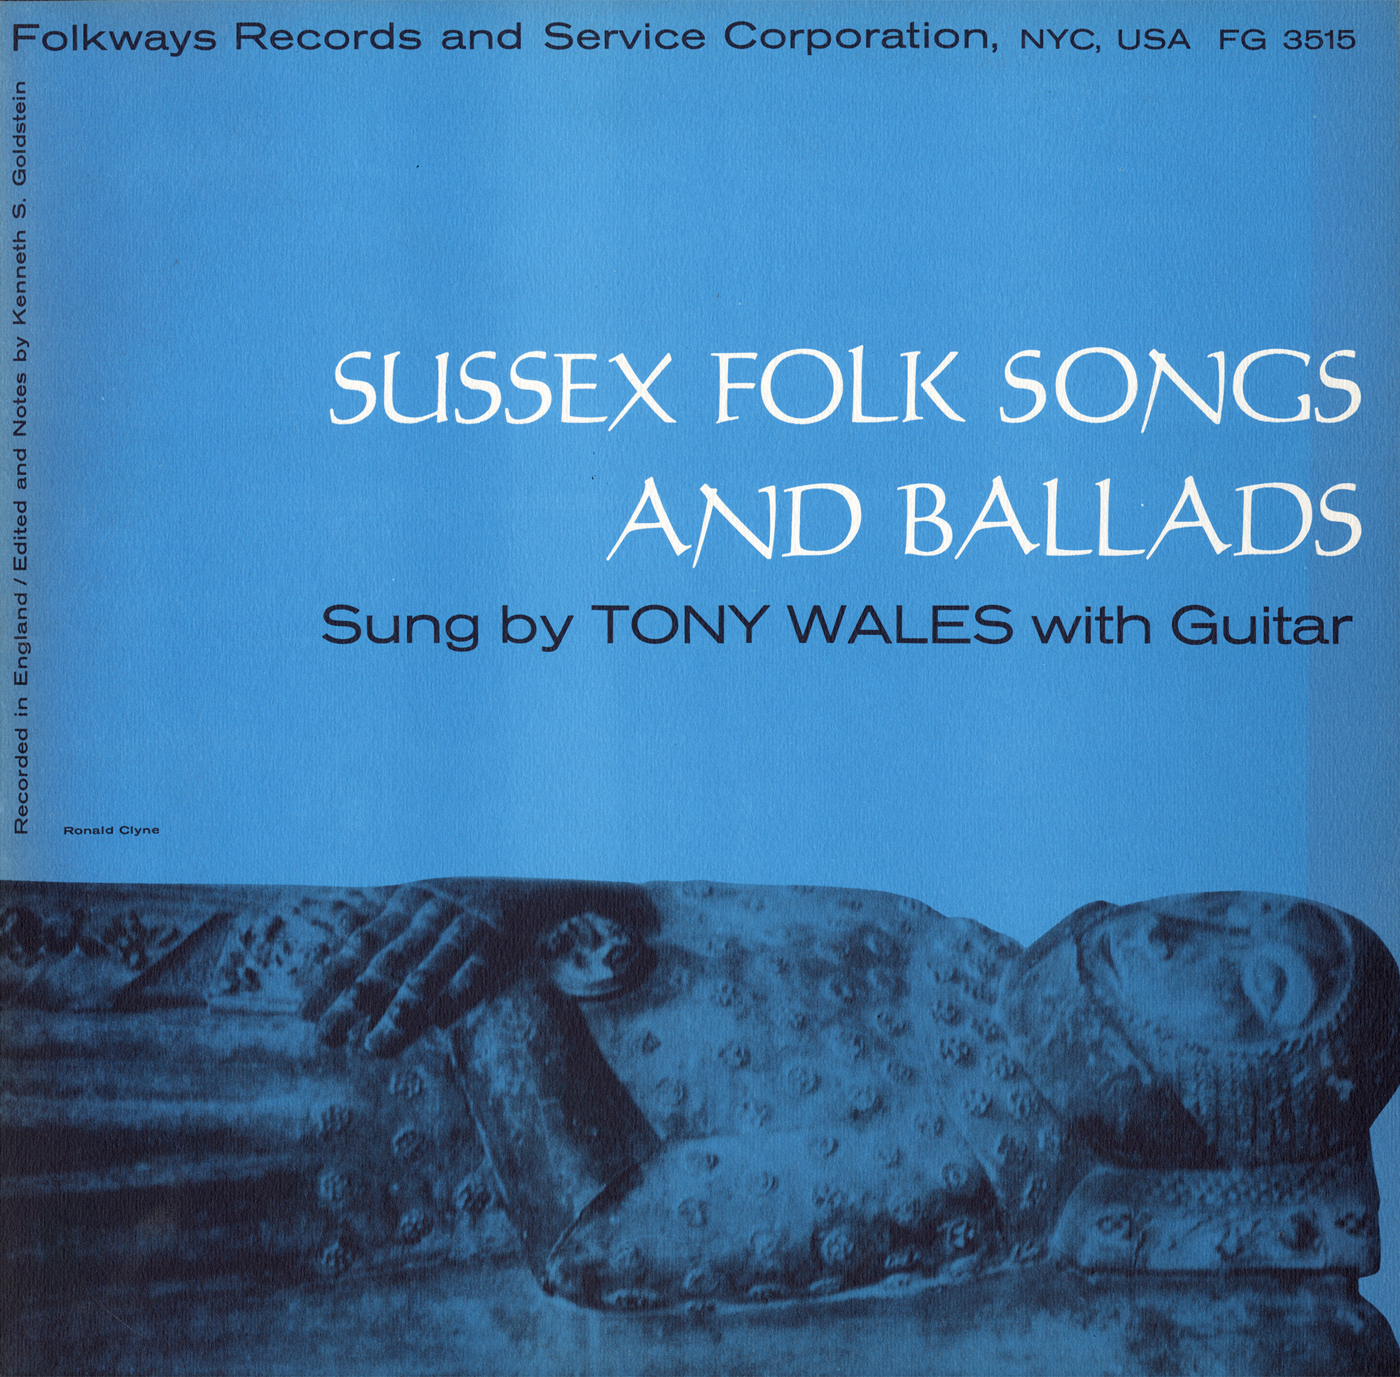 sussex-folk-songs-and-ballads-smithsonian-folkways-recordings